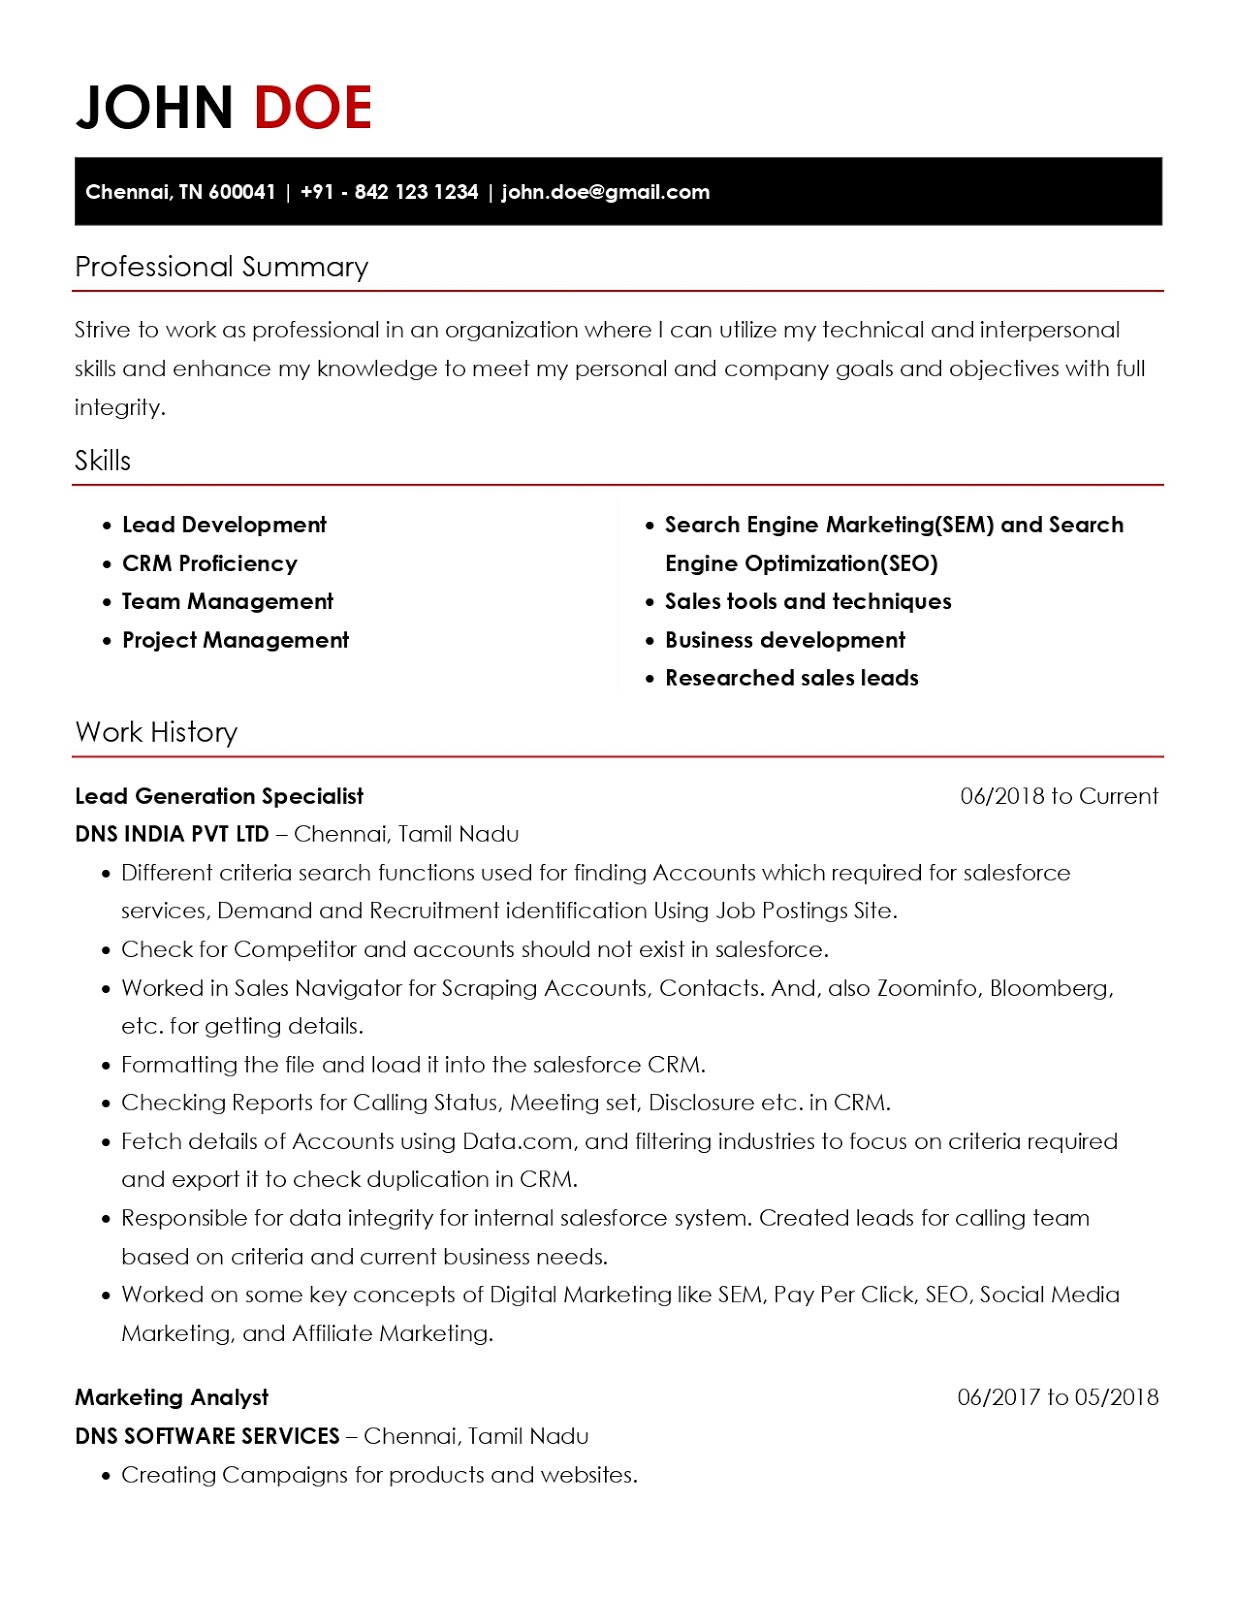 download-resume-format-in-word-for-freshers-experienced